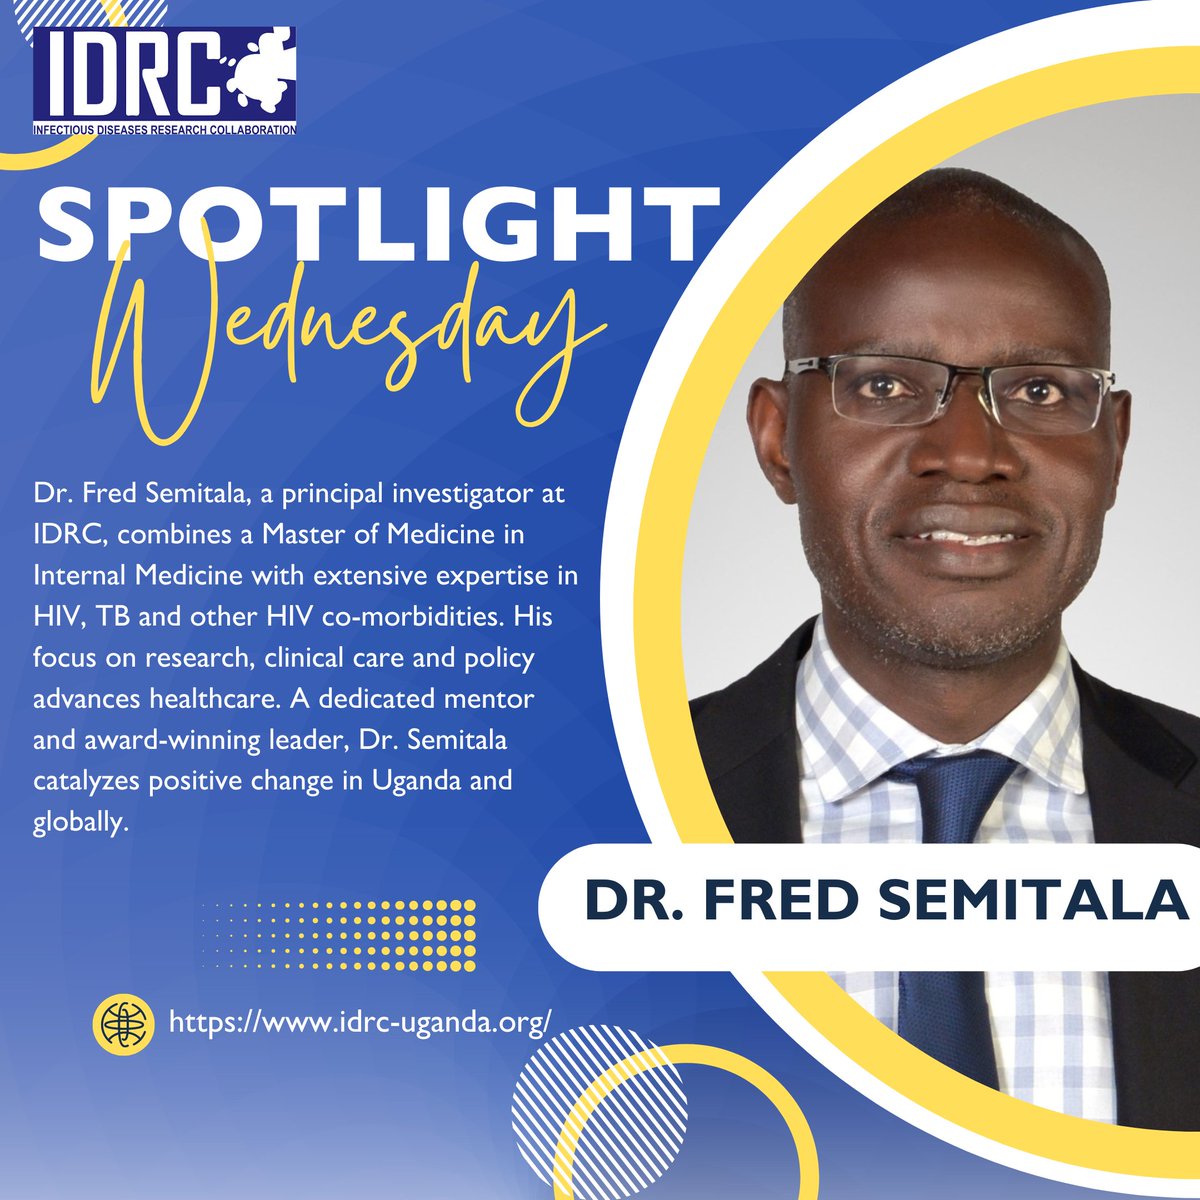 Sending a huge round of applause to @SemitalaFred for his outstanding work at @IDRC_Uganda 👏Join us in shining the spotlight on this incredible principal investigator on Spotlight Wednesday! 🥳 #Spotlight #spotlightwednesday